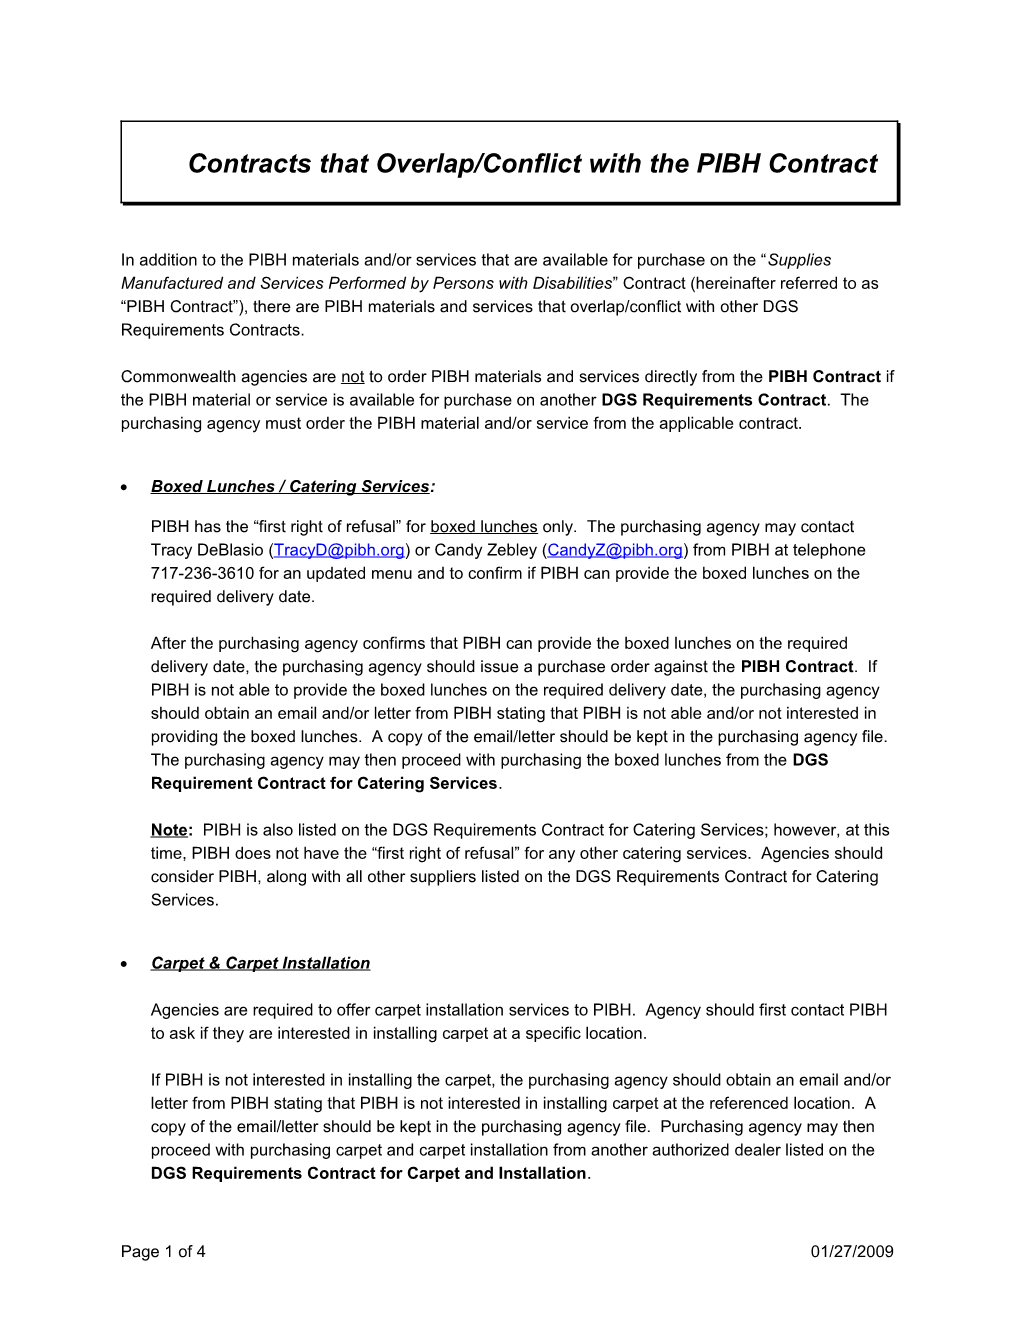 Contracts That Overlap/Conflict with the PIBH Contract